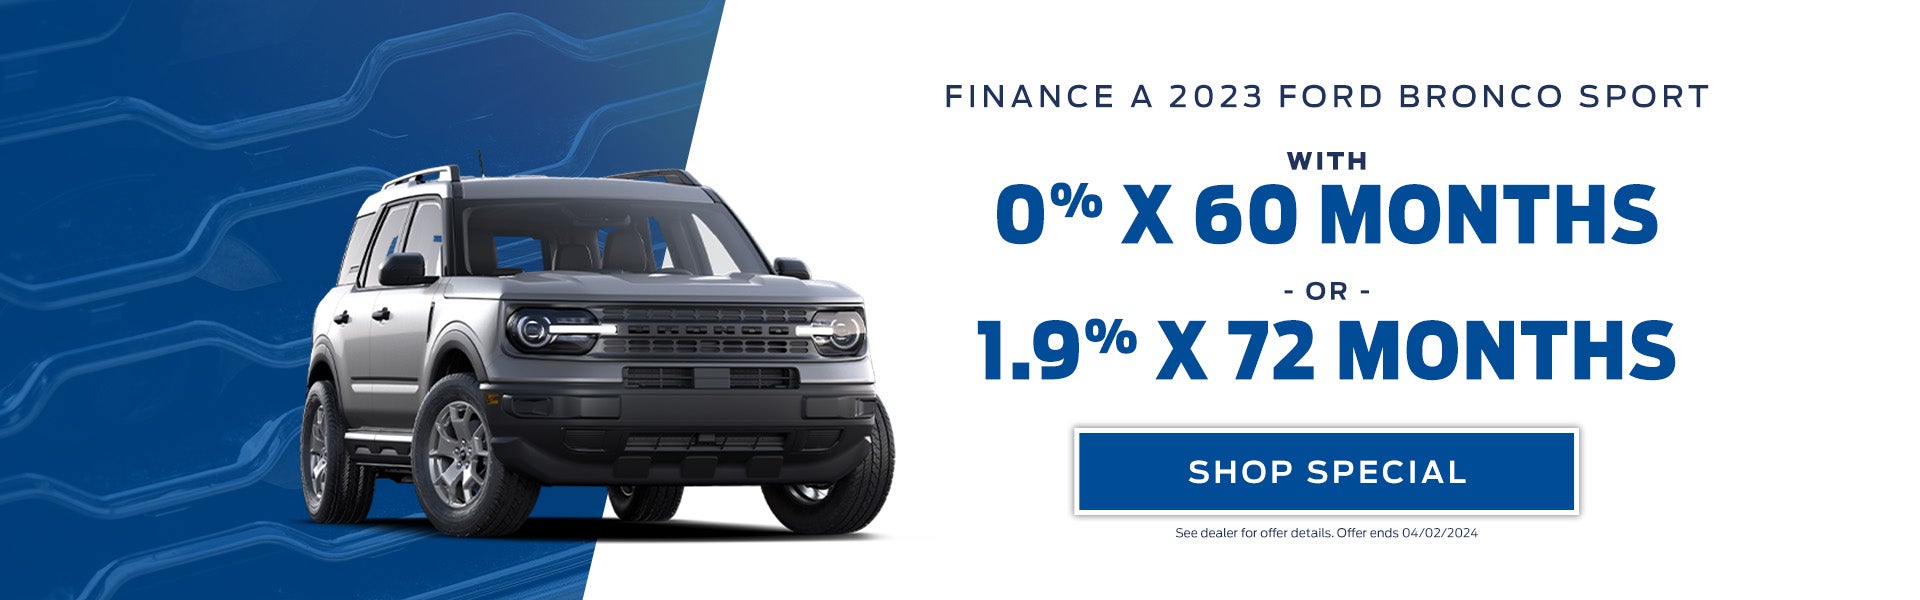 finance a 2023 ford bronco sport with 0% for 60 months 